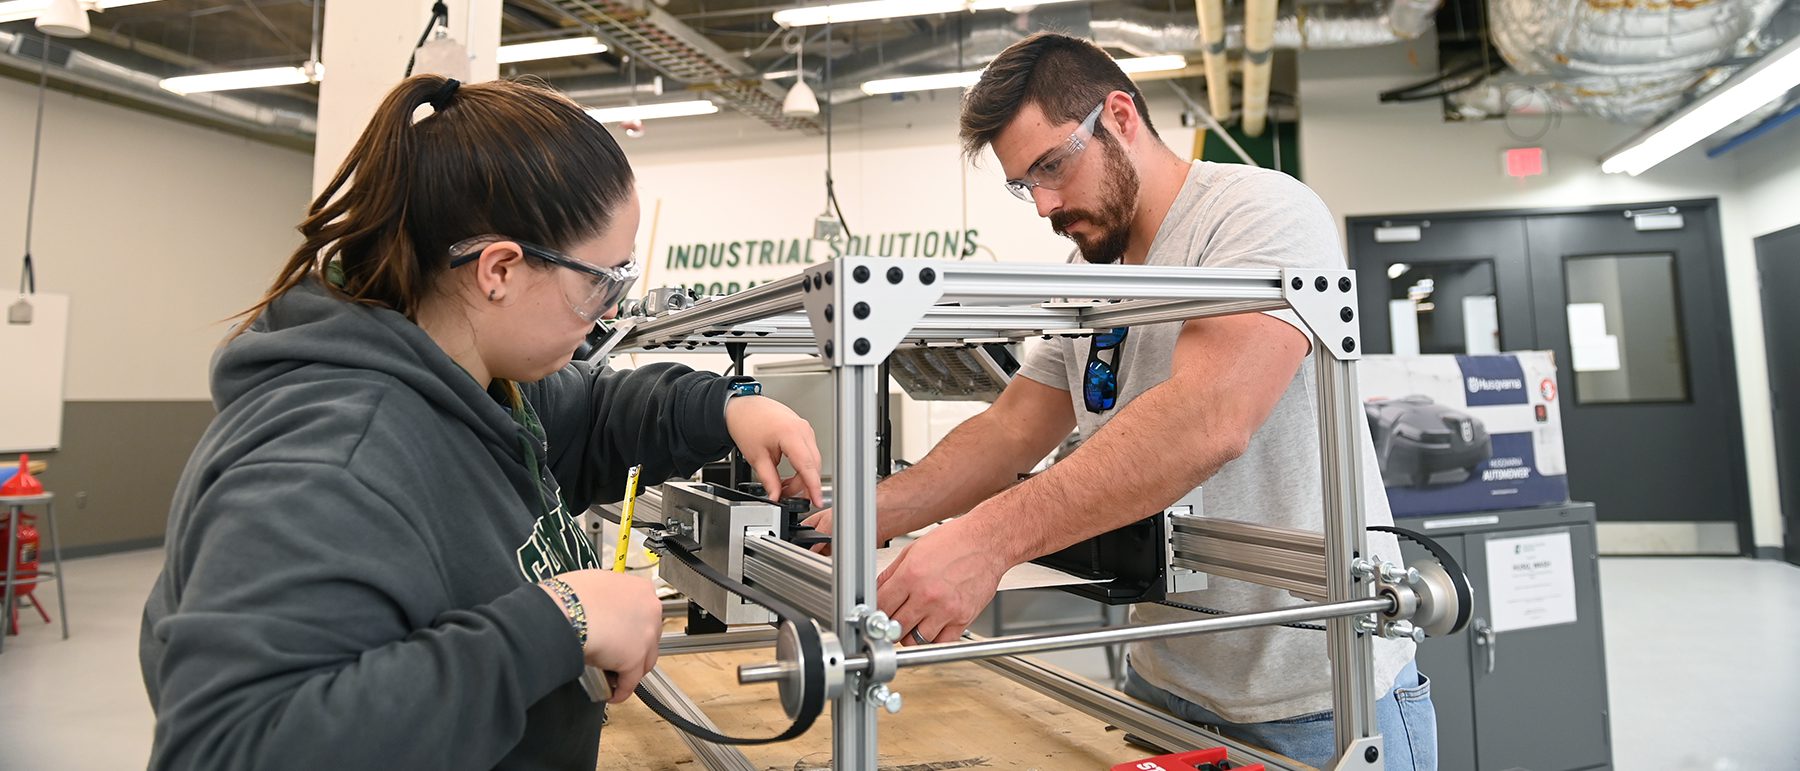 Two students work on project in the Industrial Solutions Lab